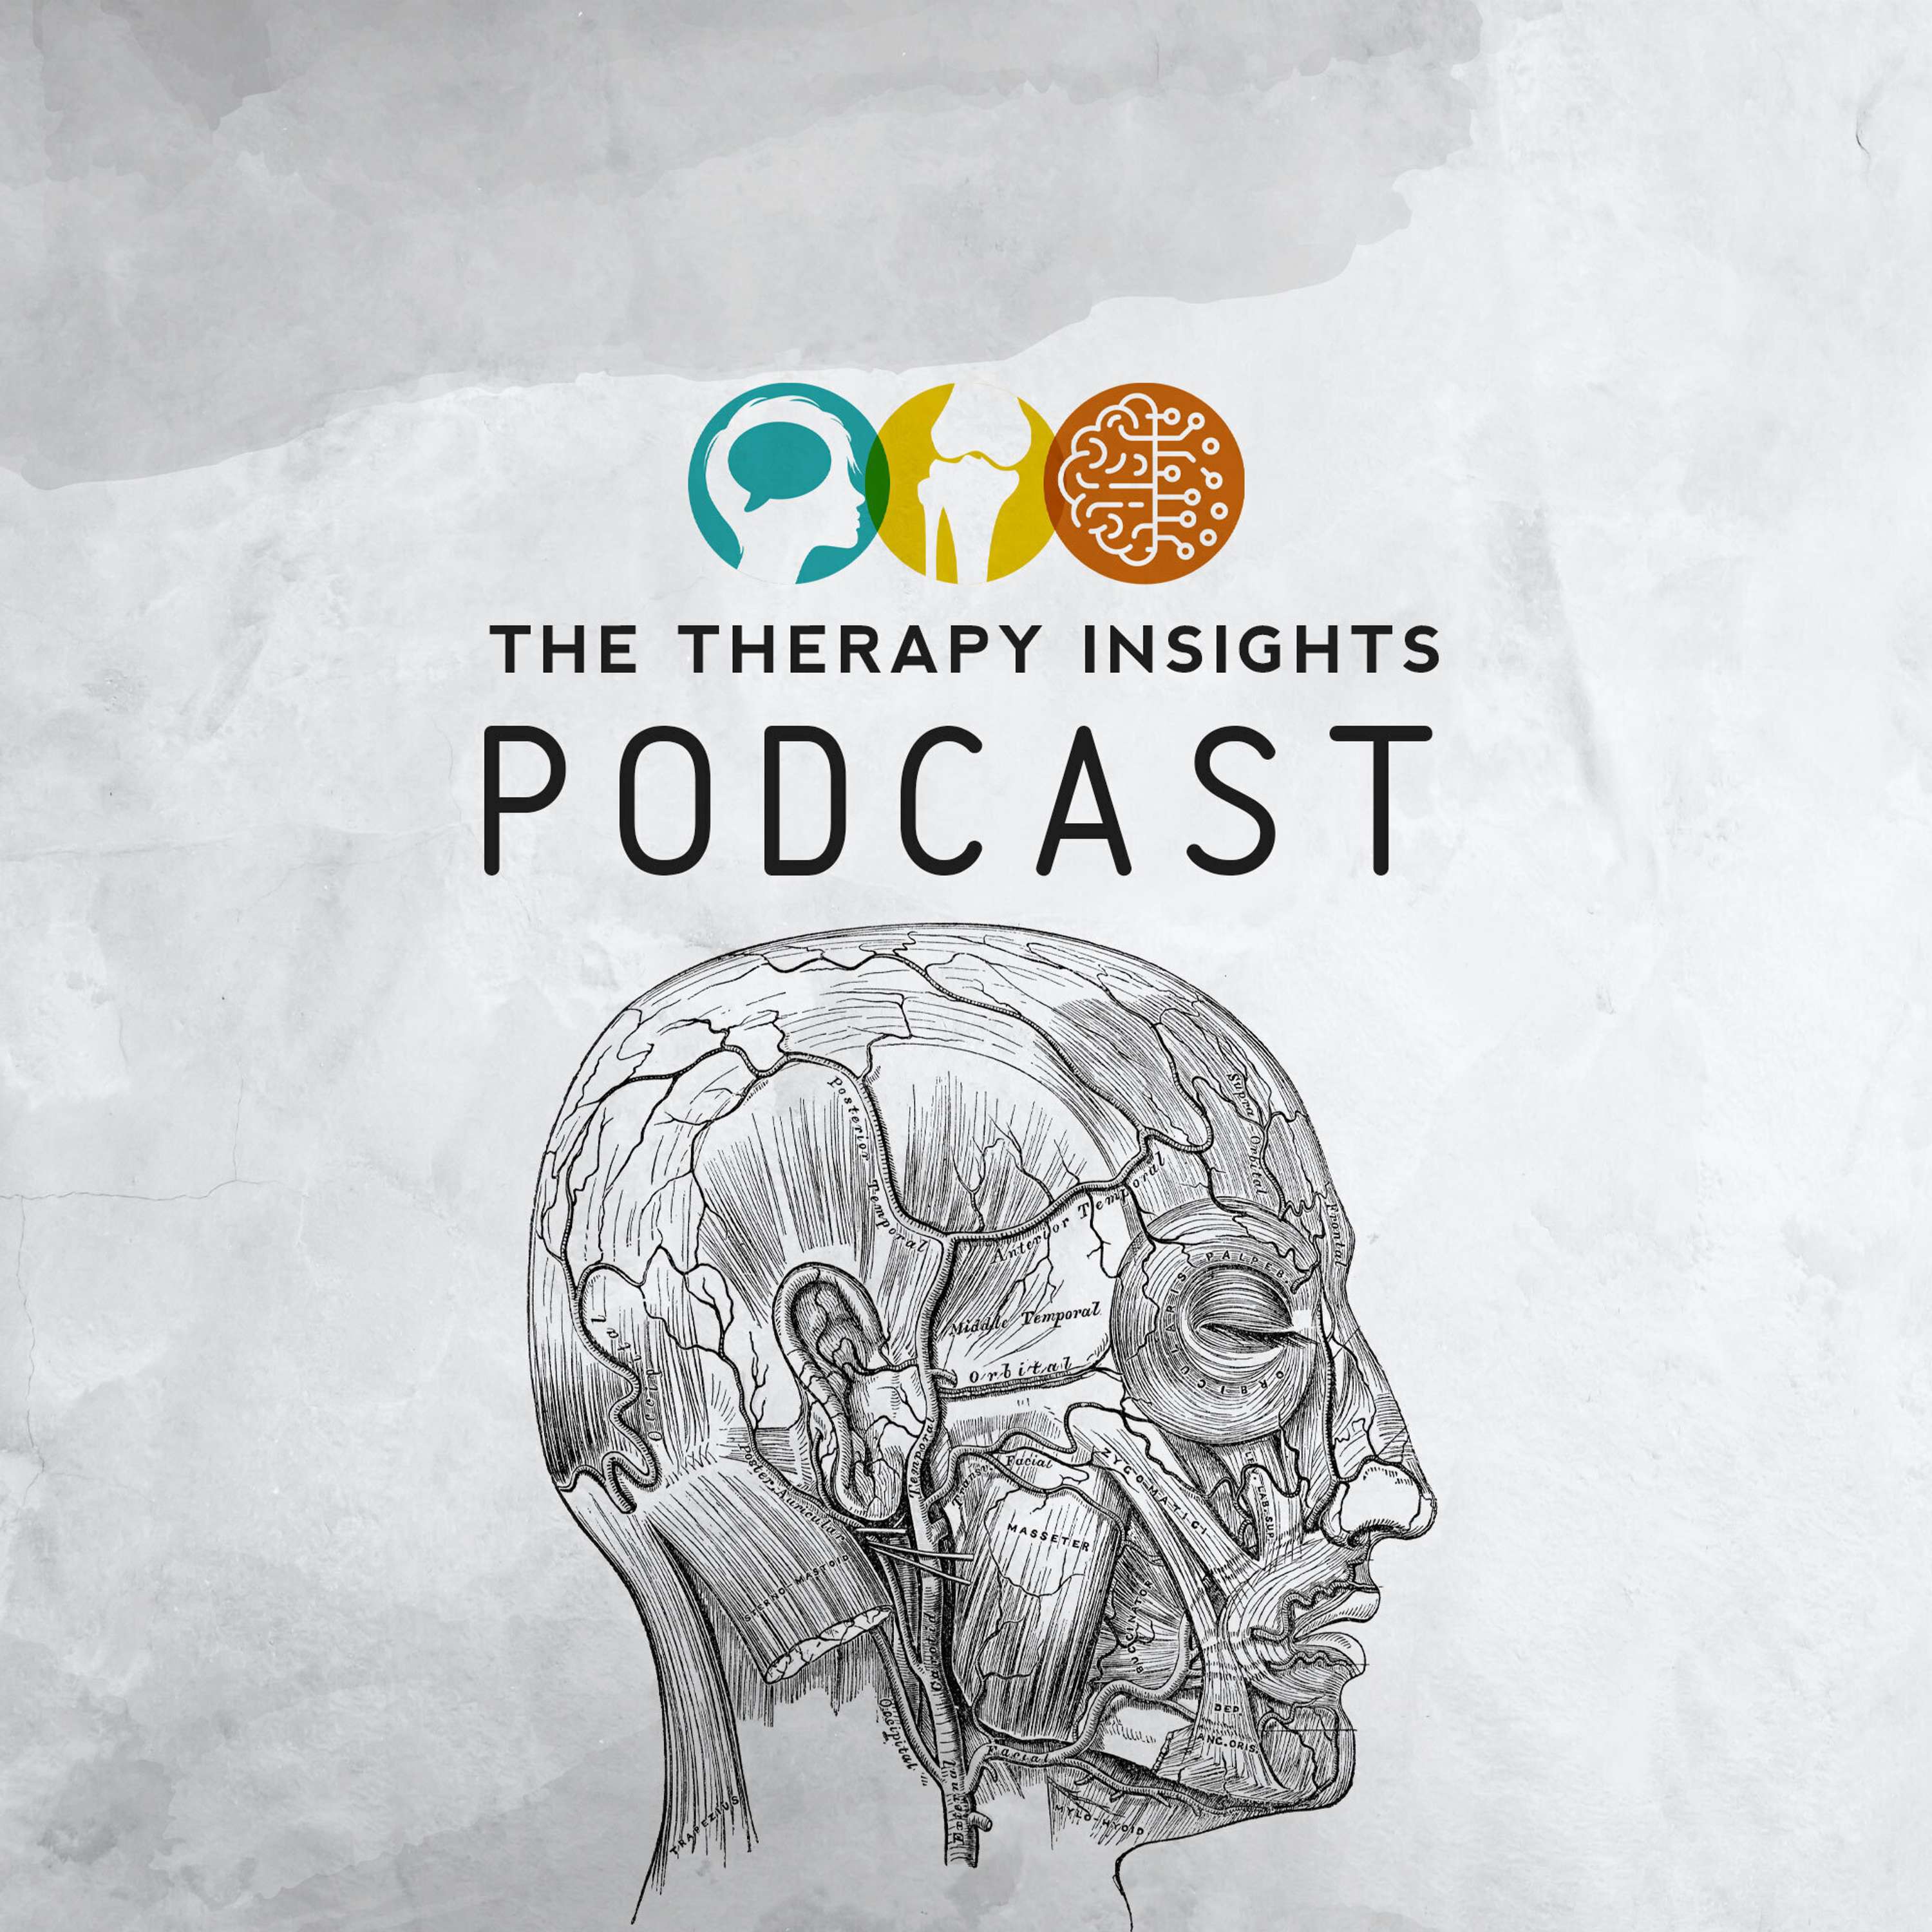 The Therapy Insights Podcast